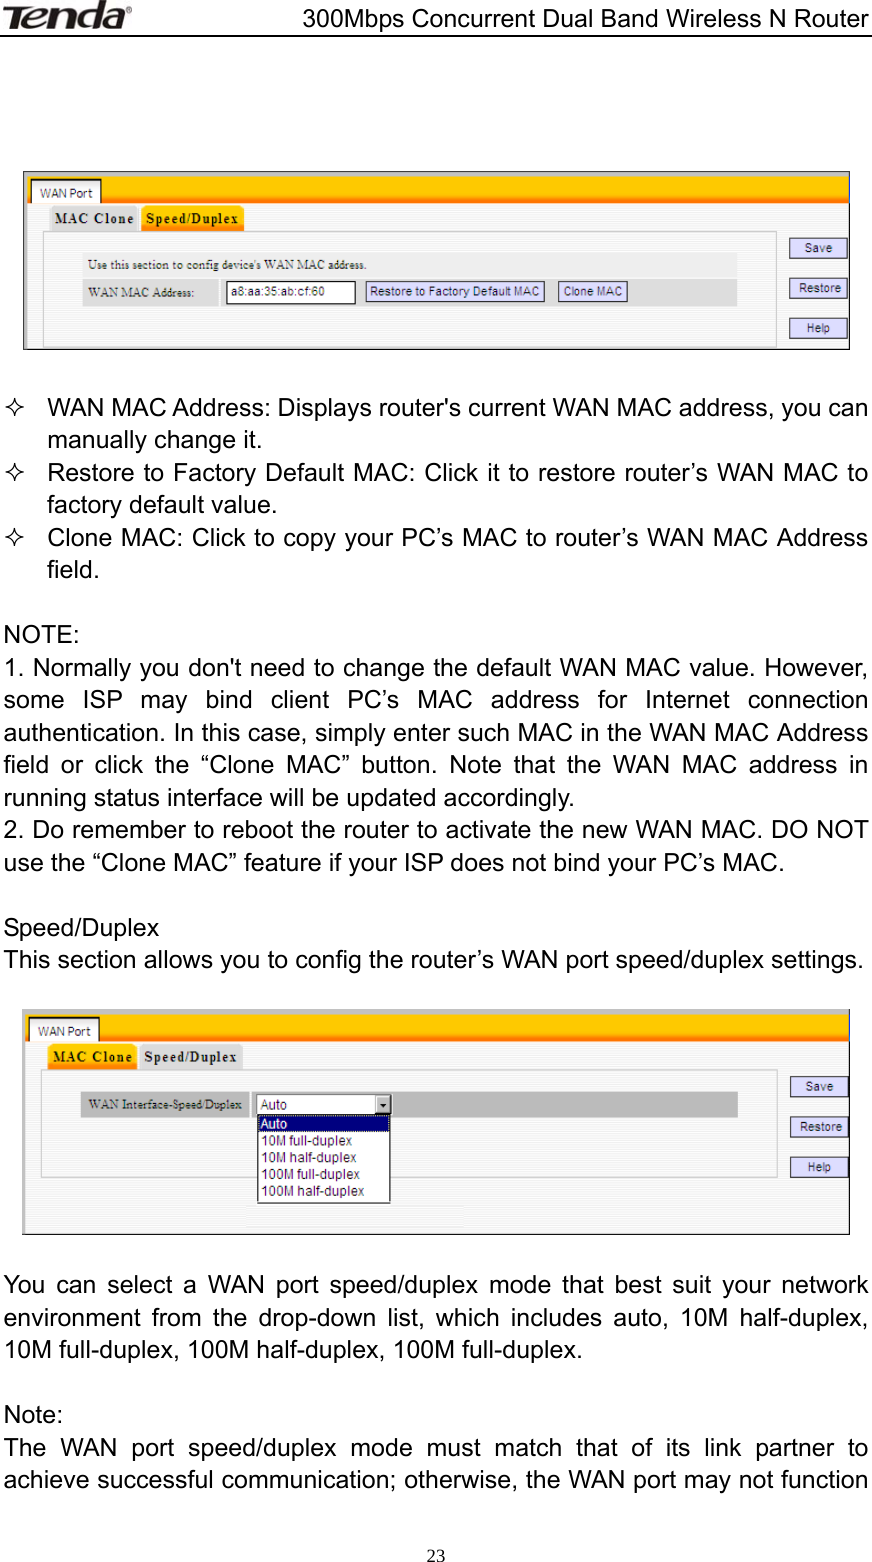                       300Mbps Concurrent Dual Band Wireless N Router  23       WAN MAC Address: Displays router&apos;s current WAN MAC address, you can manually change it.   Restore to Factory Default MAC: Click it to restore router’s WAN MAC to factory default value.   Clone MAC: Click to copy your PC’s MAC to router’s WAN MAC Address field.  NOTE: 1. Normally you don&apos;t need to change the default WAN MAC value. However, some ISP may bind client PC’s MAC address for Internet connection authentication. In this case, simply enter such MAC in the WAN MAC Address field or click the “Clone MAC” button. Note that the WAN MAC address in running status interface will be updated accordingly. 2. Do remember to reboot the router to activate the new WAN MAC. DO NOT use the “Clone MAC” feature if your ISP does not bind your PC’s MAC.    Speed/Duplex This section allows you to config the router’s WAN port speed/duplex settings.    You can select a WAN port speed/duplex mode that best suit your network environment from the drop-down list, which includes auto, 10M half-duplex, 10M full-duplex, 100M half-duplex, 100M full-duplex.  Note:  The WAN port speed/duplex mode must match that of its link partner to achieve successful communication; otherwise, the WAN port may not function 